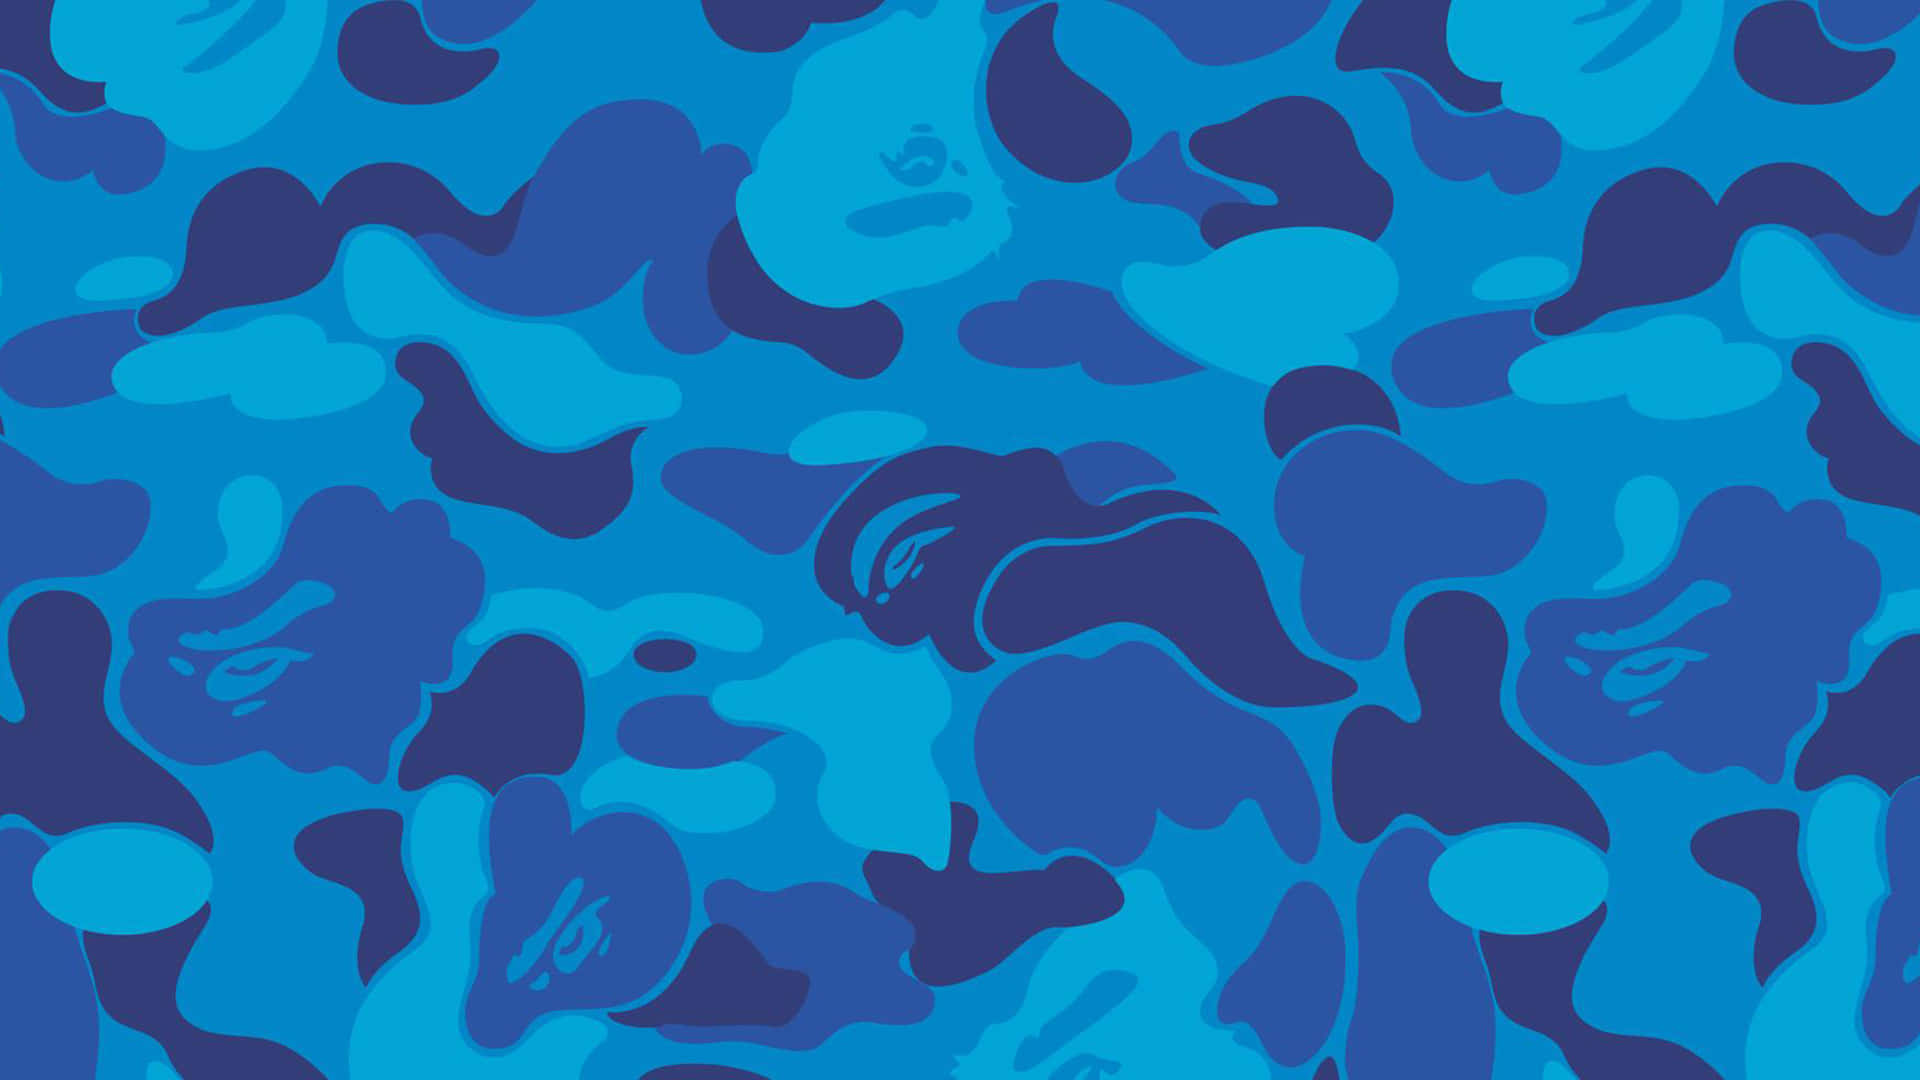 A Blue And Black Camouflage Pattern Wallpaper